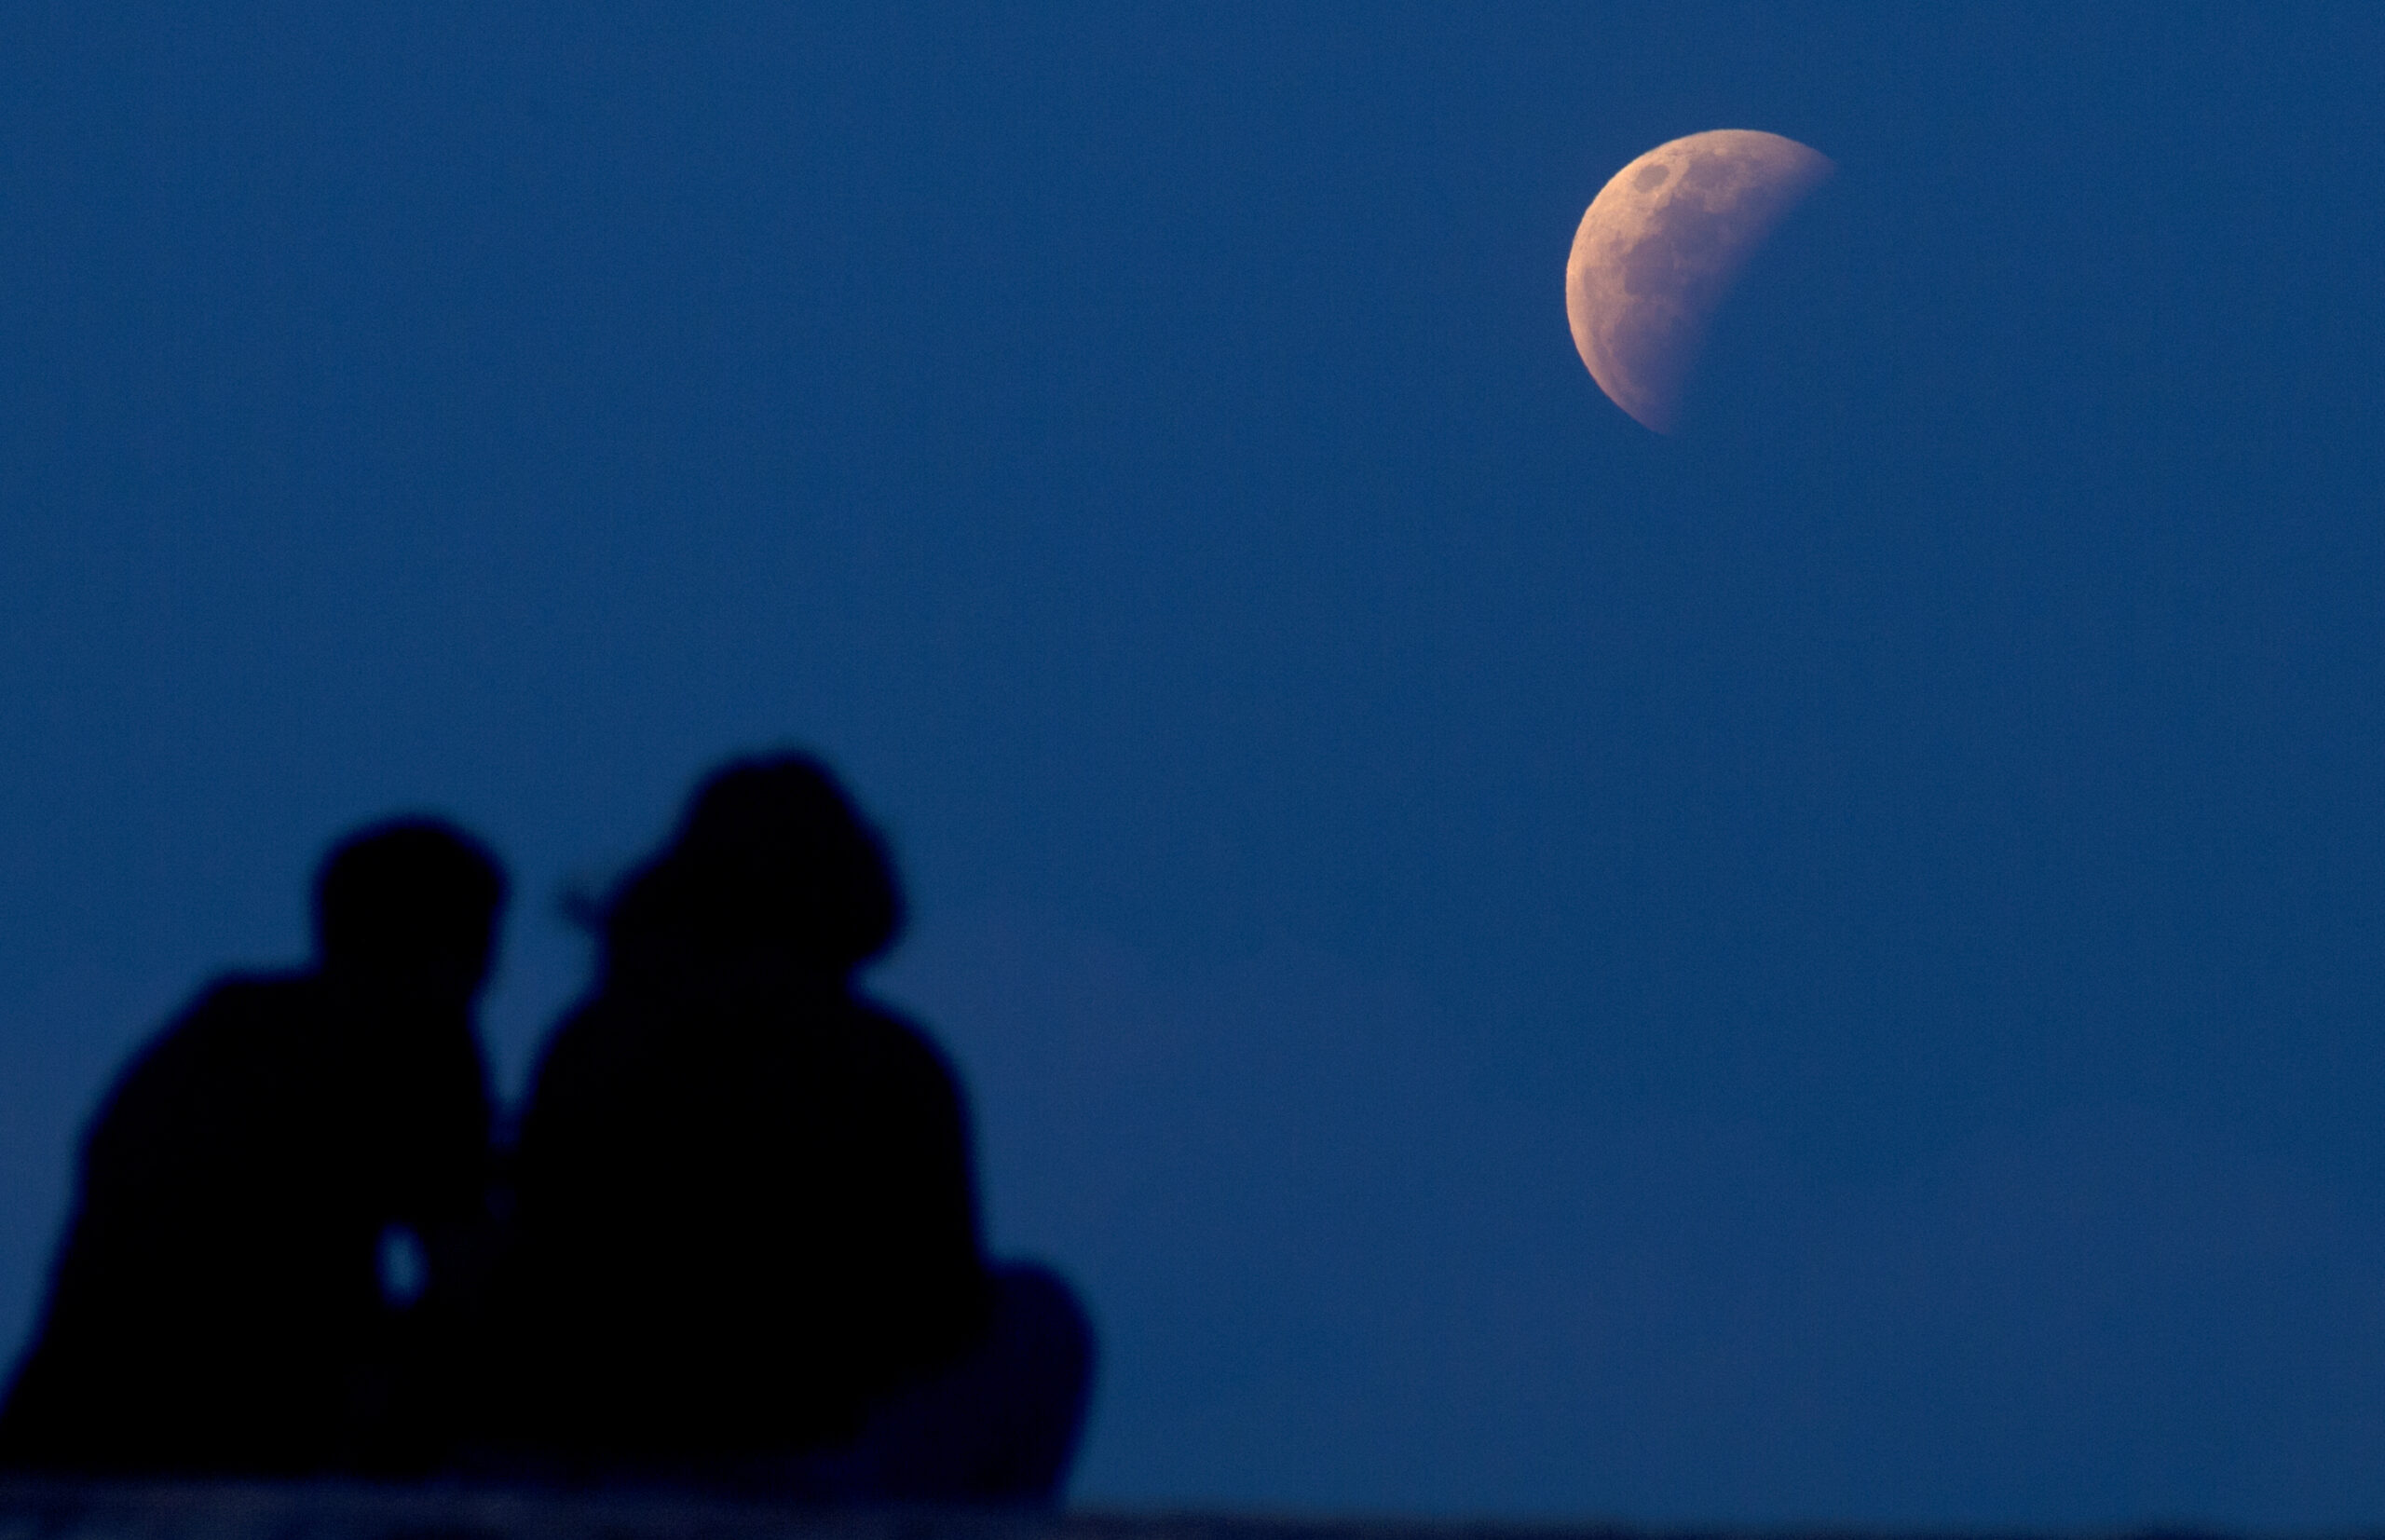 A couple watch the lunar eclipse at Sanur beach in Bali, Indonesia on Wednesday, May 26, 2021. The total lunar eclipse, also known as a super blood moon, is the first in two years with the reddish-orange color the result of all the sunrises and sunsets in Earth's atmosphere projected onto the surface of the eclipsed moon. (AP Photo/Firdia Lisnawati)